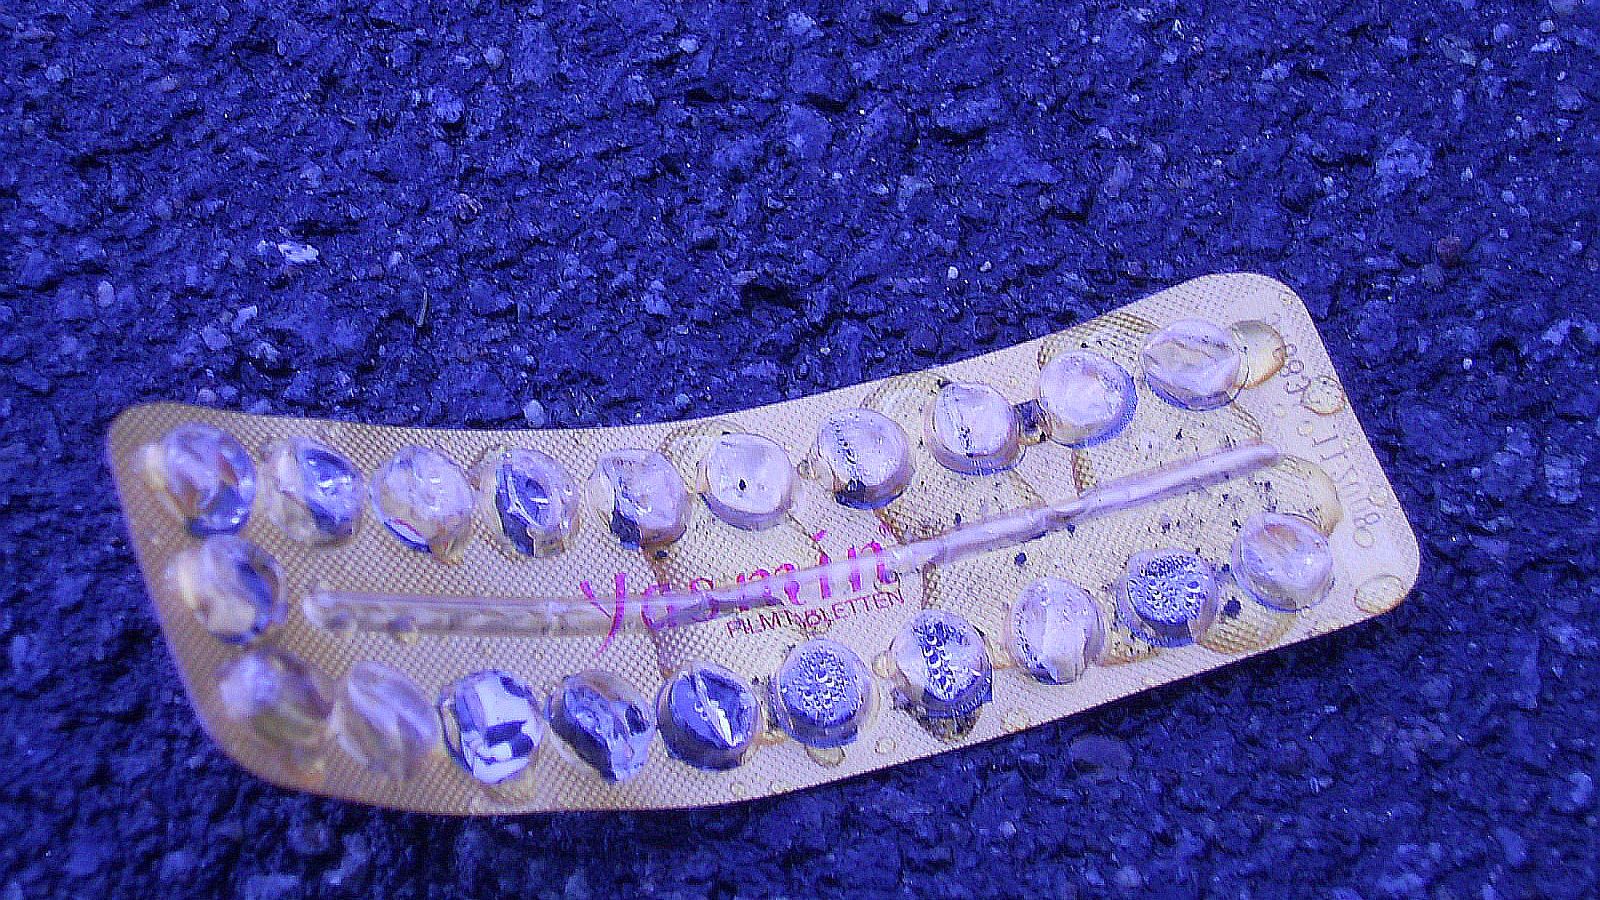 What You Need To Know About The Link Between Birth Control And Cancer